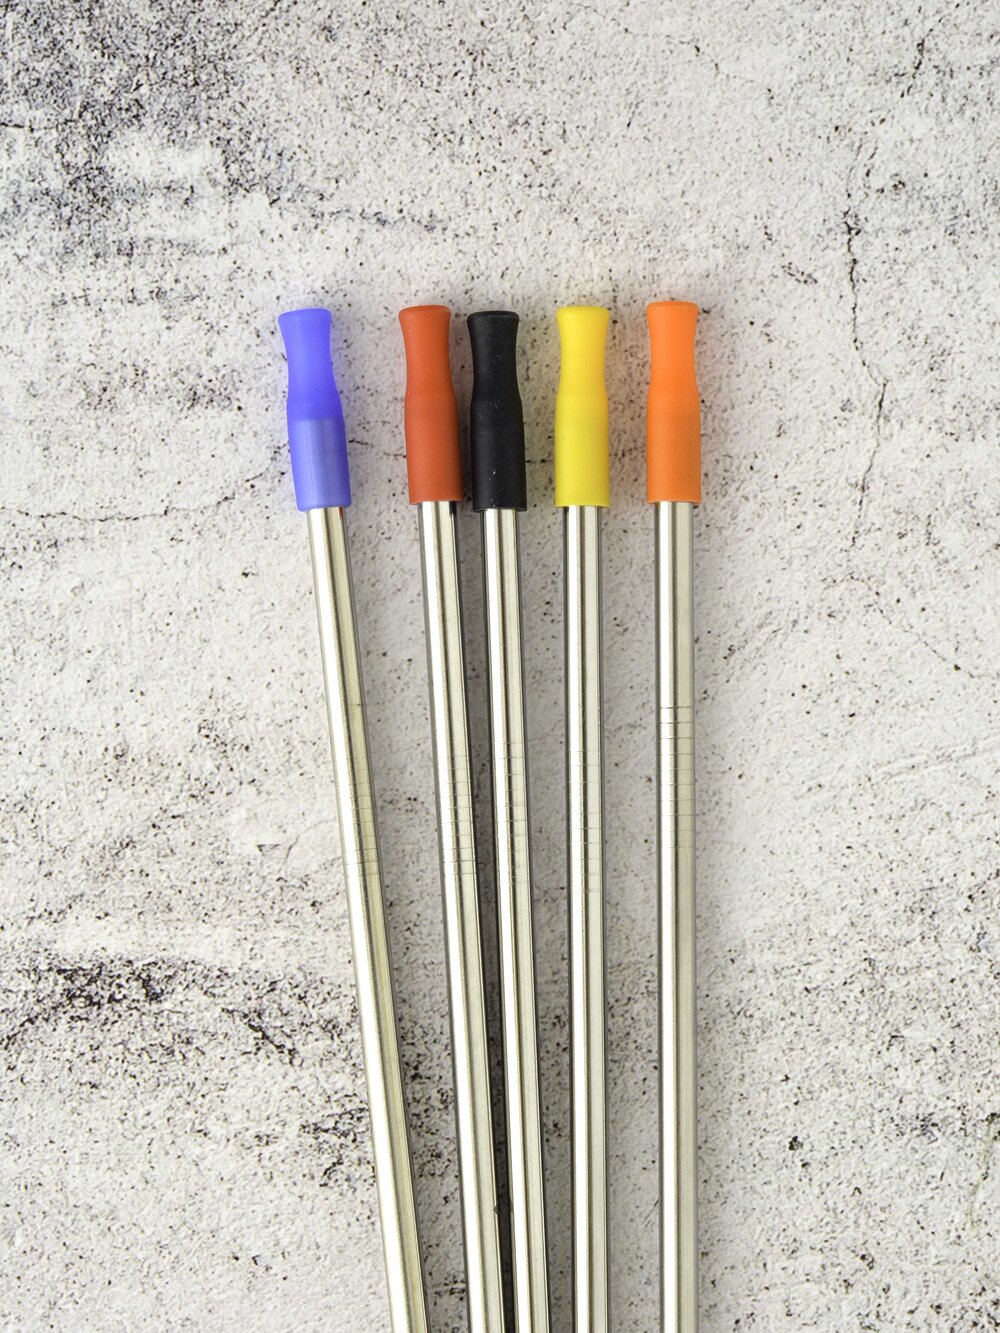 Silicone Straw Tips 6mm